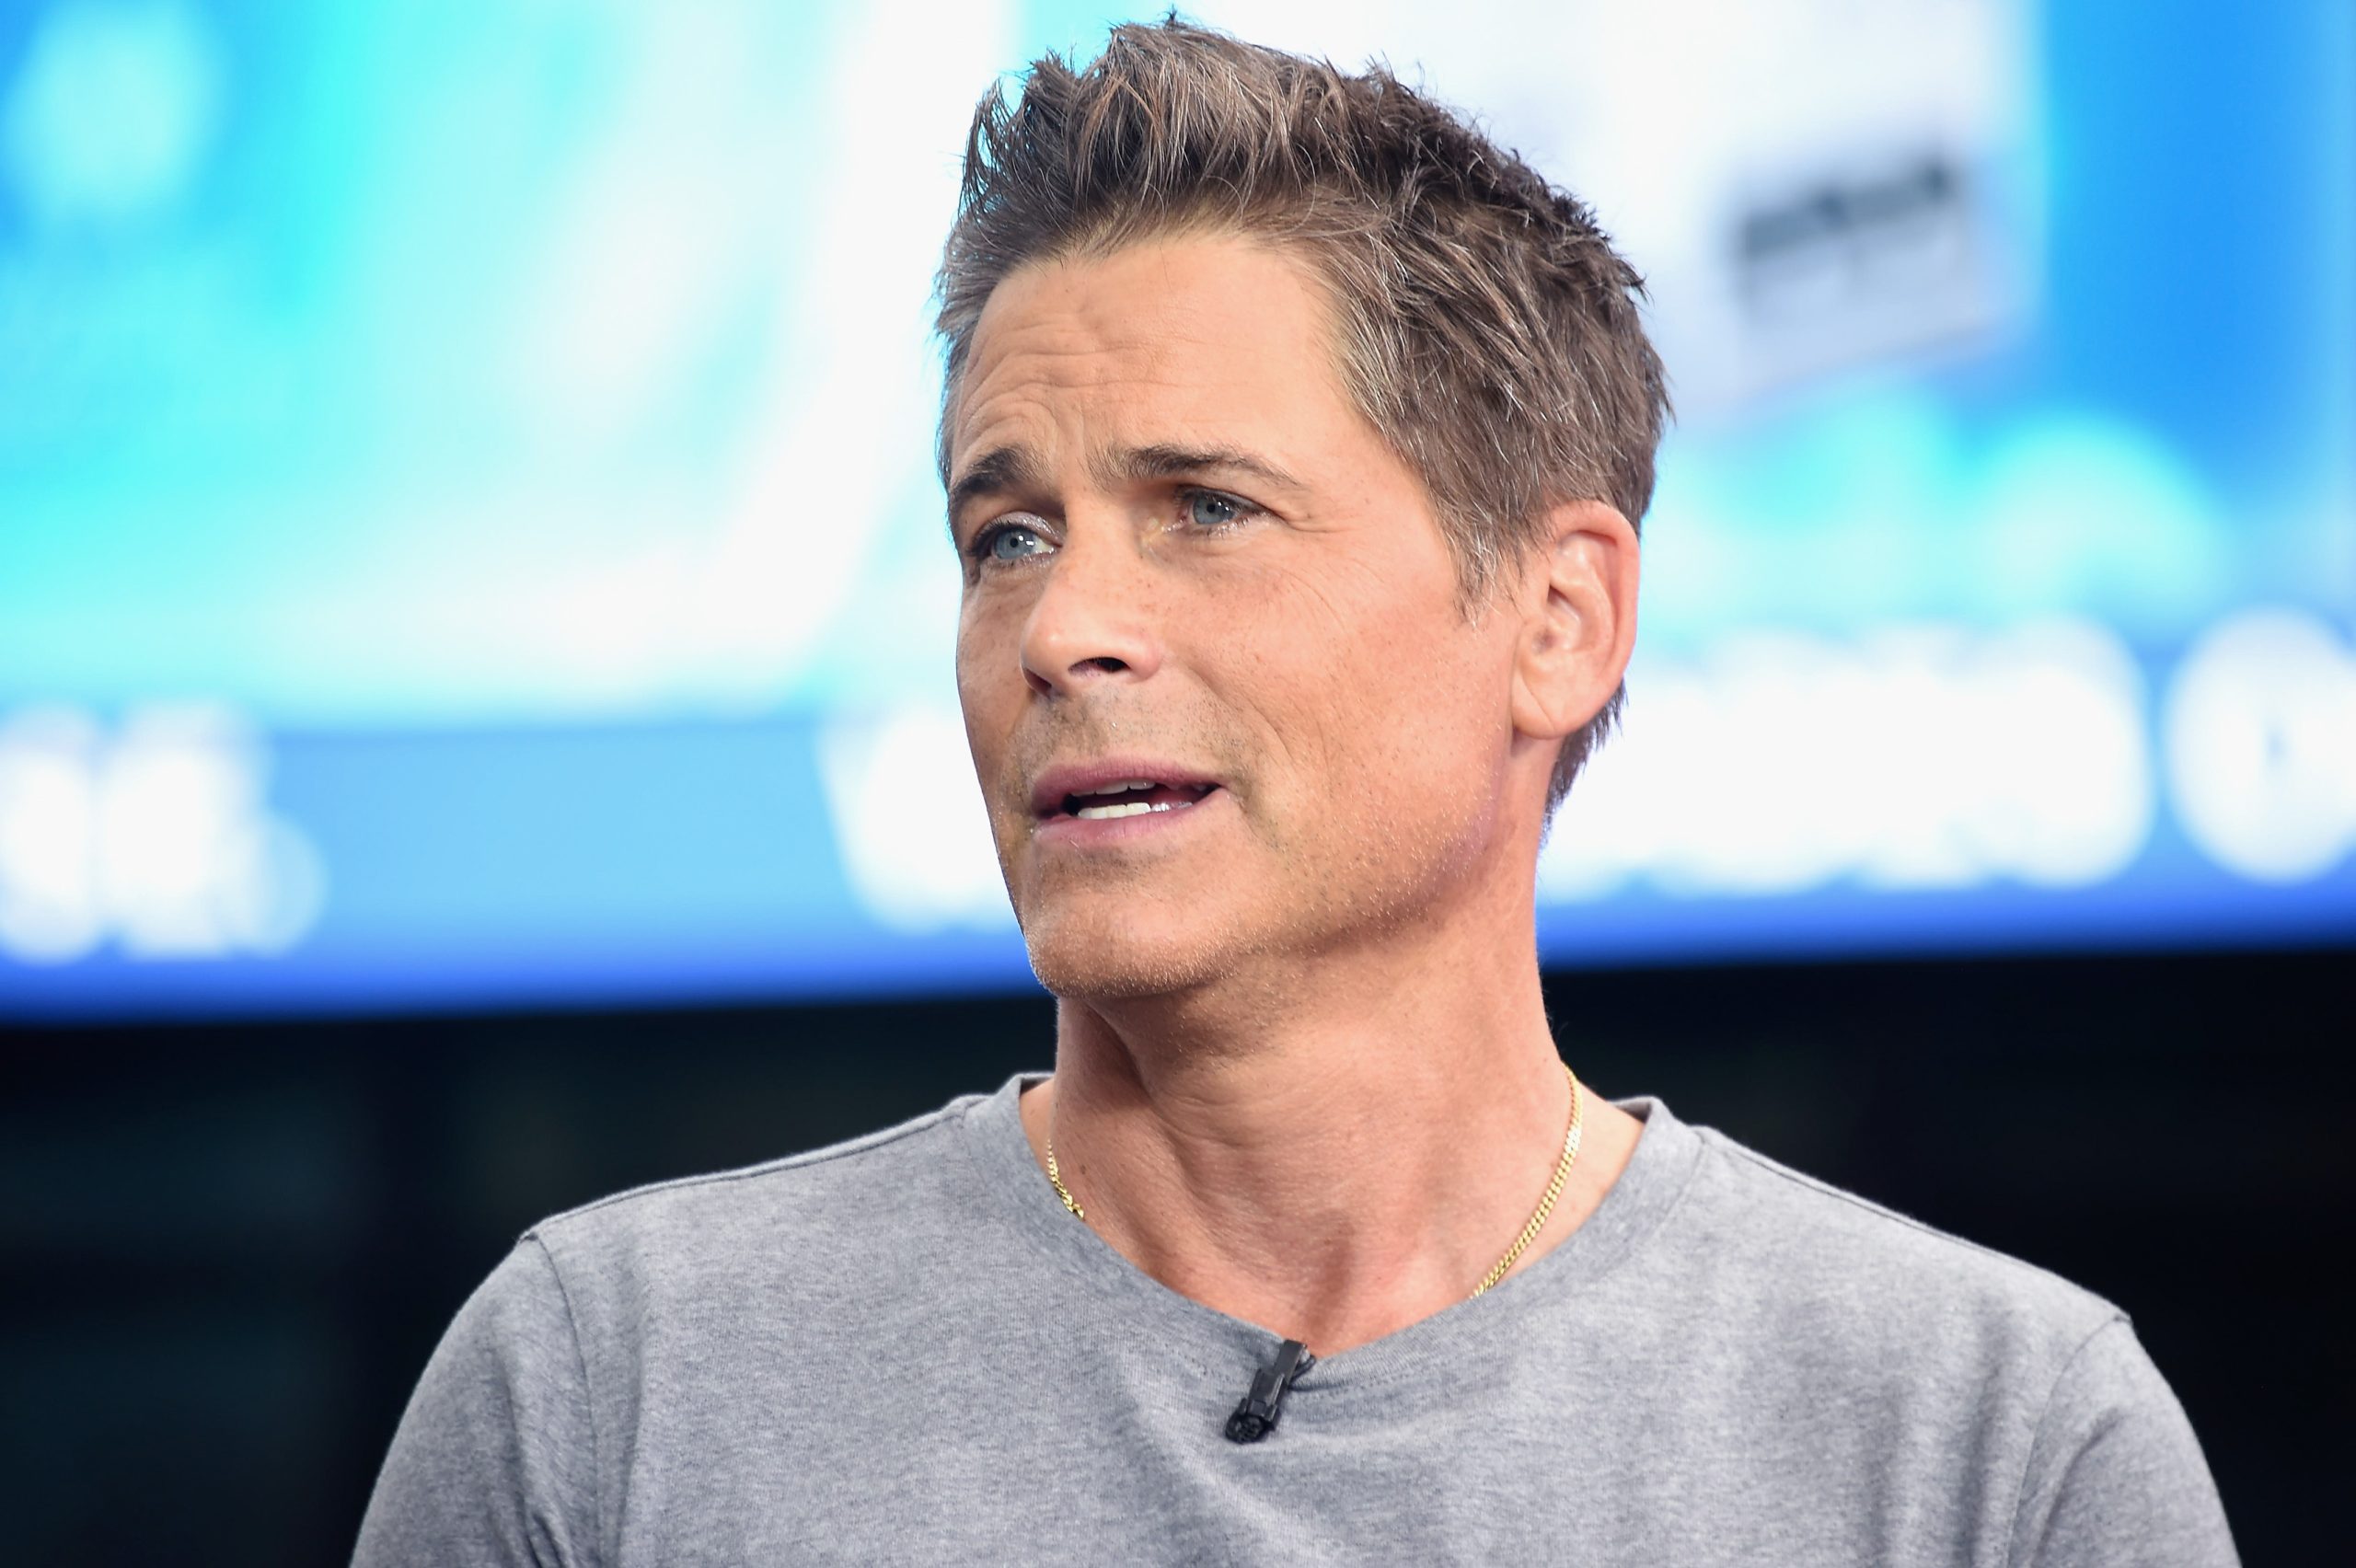 Rob Lowe Wiki, Bio, Age, Net Worth, and Other Facts